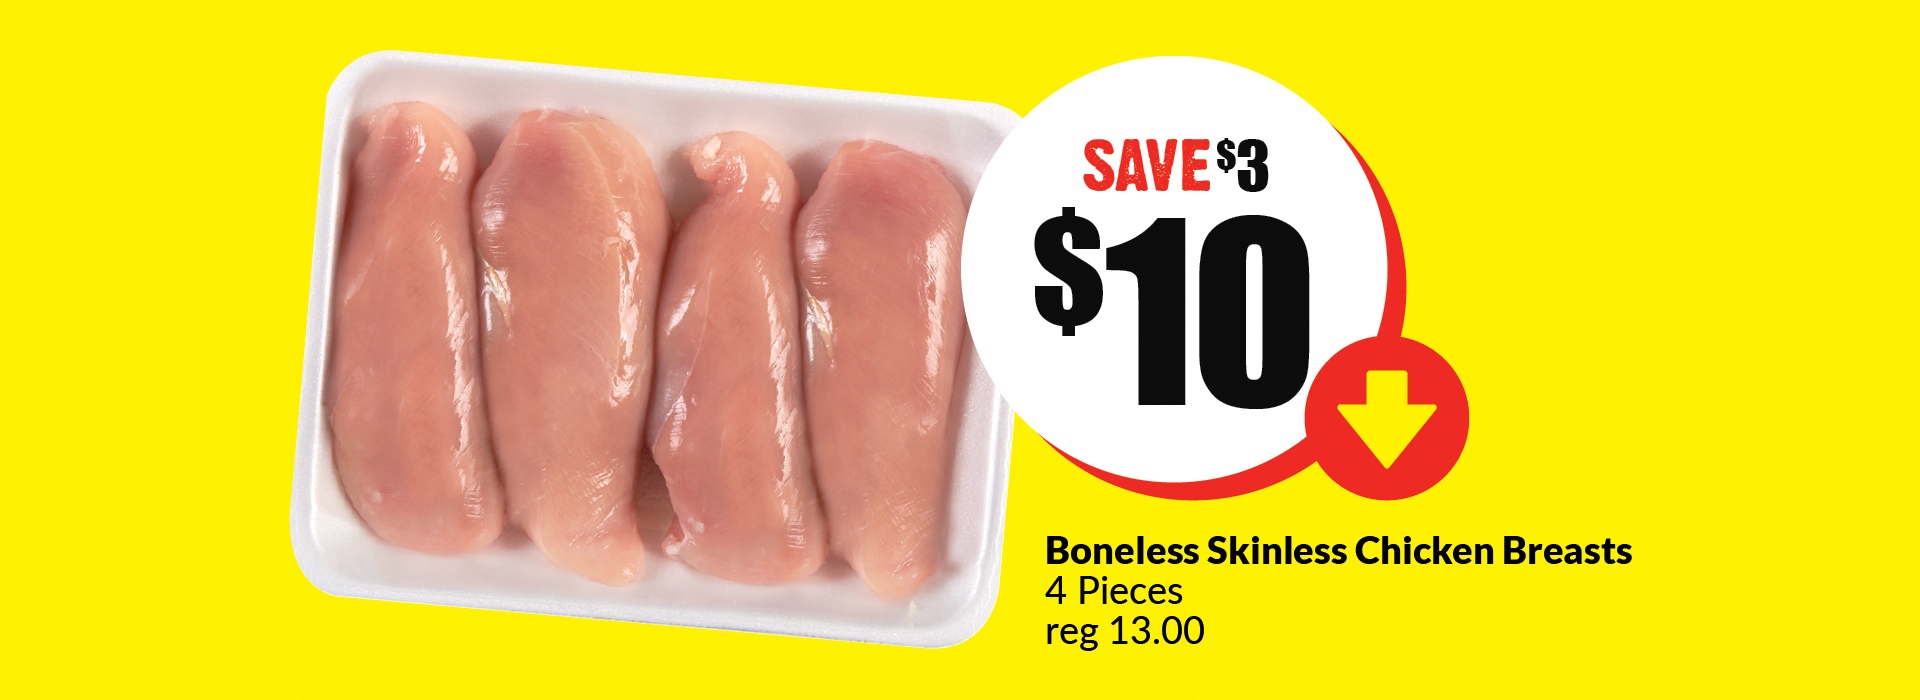 The following image contains the text," Boneless skinless chicken breasts 4 pieces, reg 13.00.Â Get them at just $10 and save up to $3."